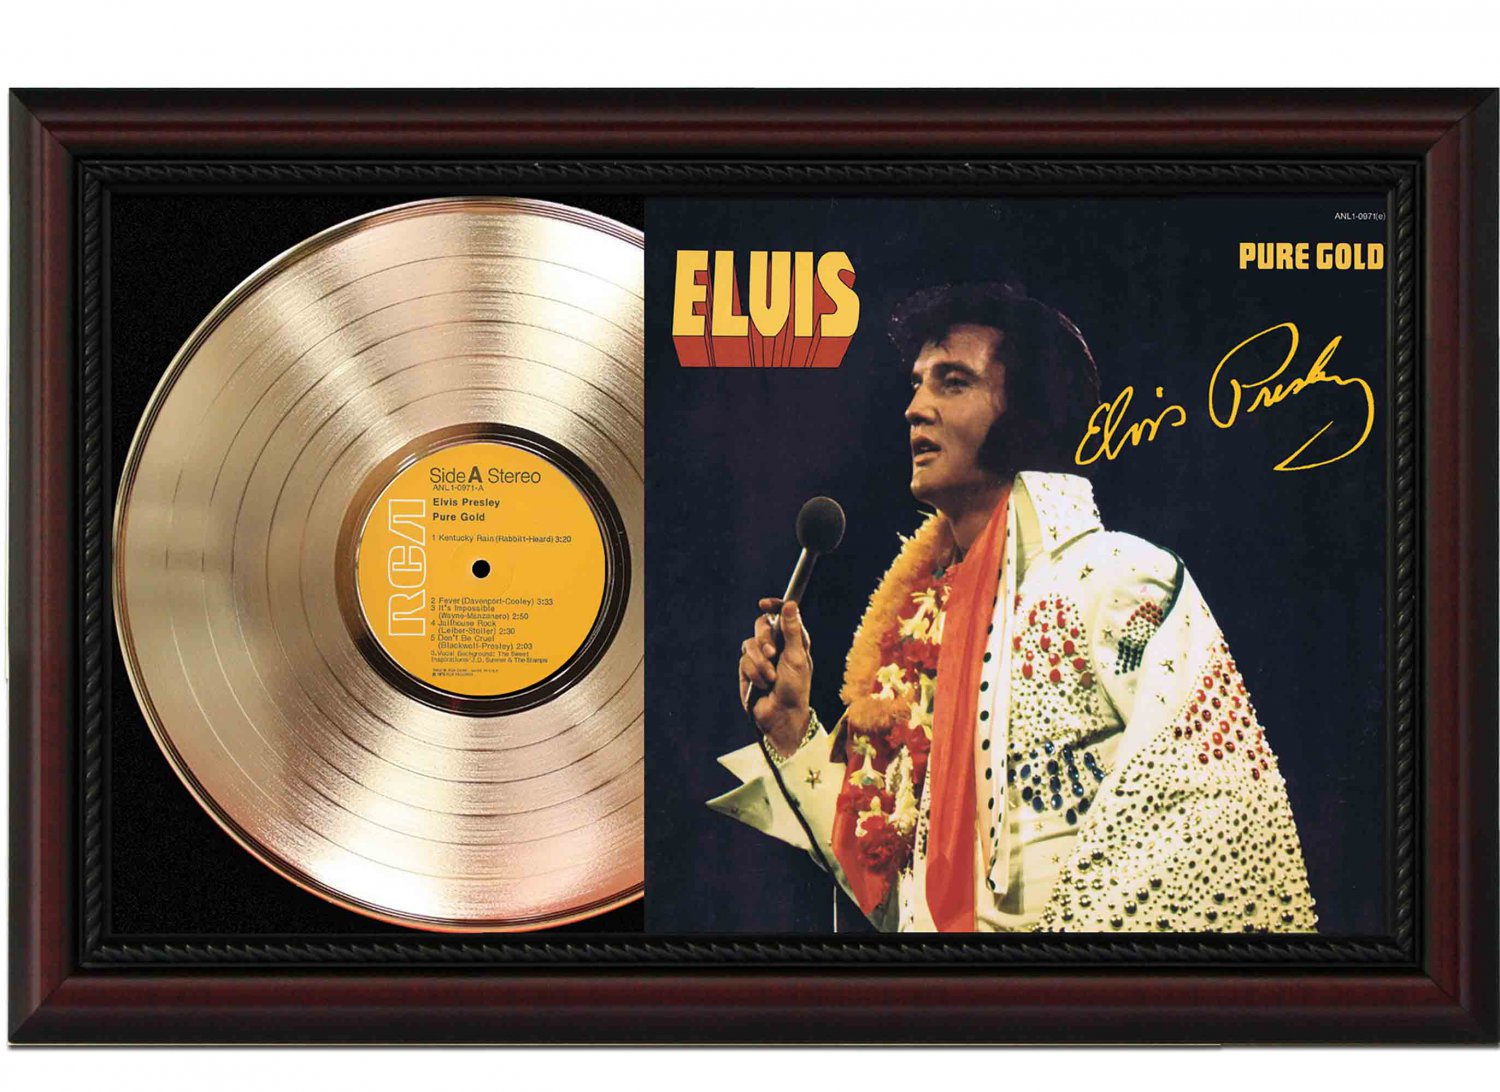 ELVIS "Pure Gold" Framed Record Display.